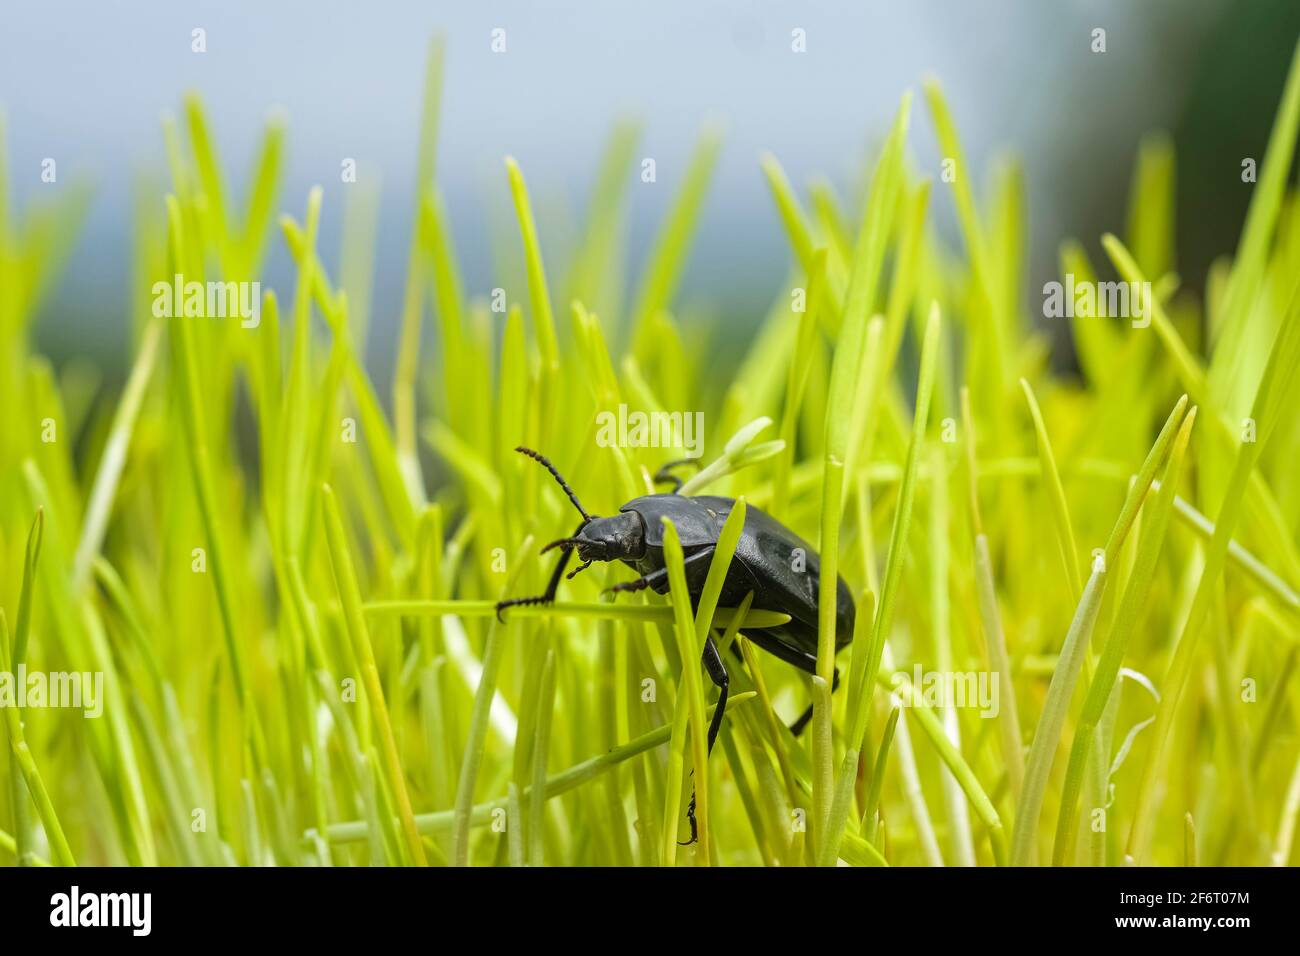 Black cockroach living on green grass meadow ecosystem,animal insects wildlife Stock Photo